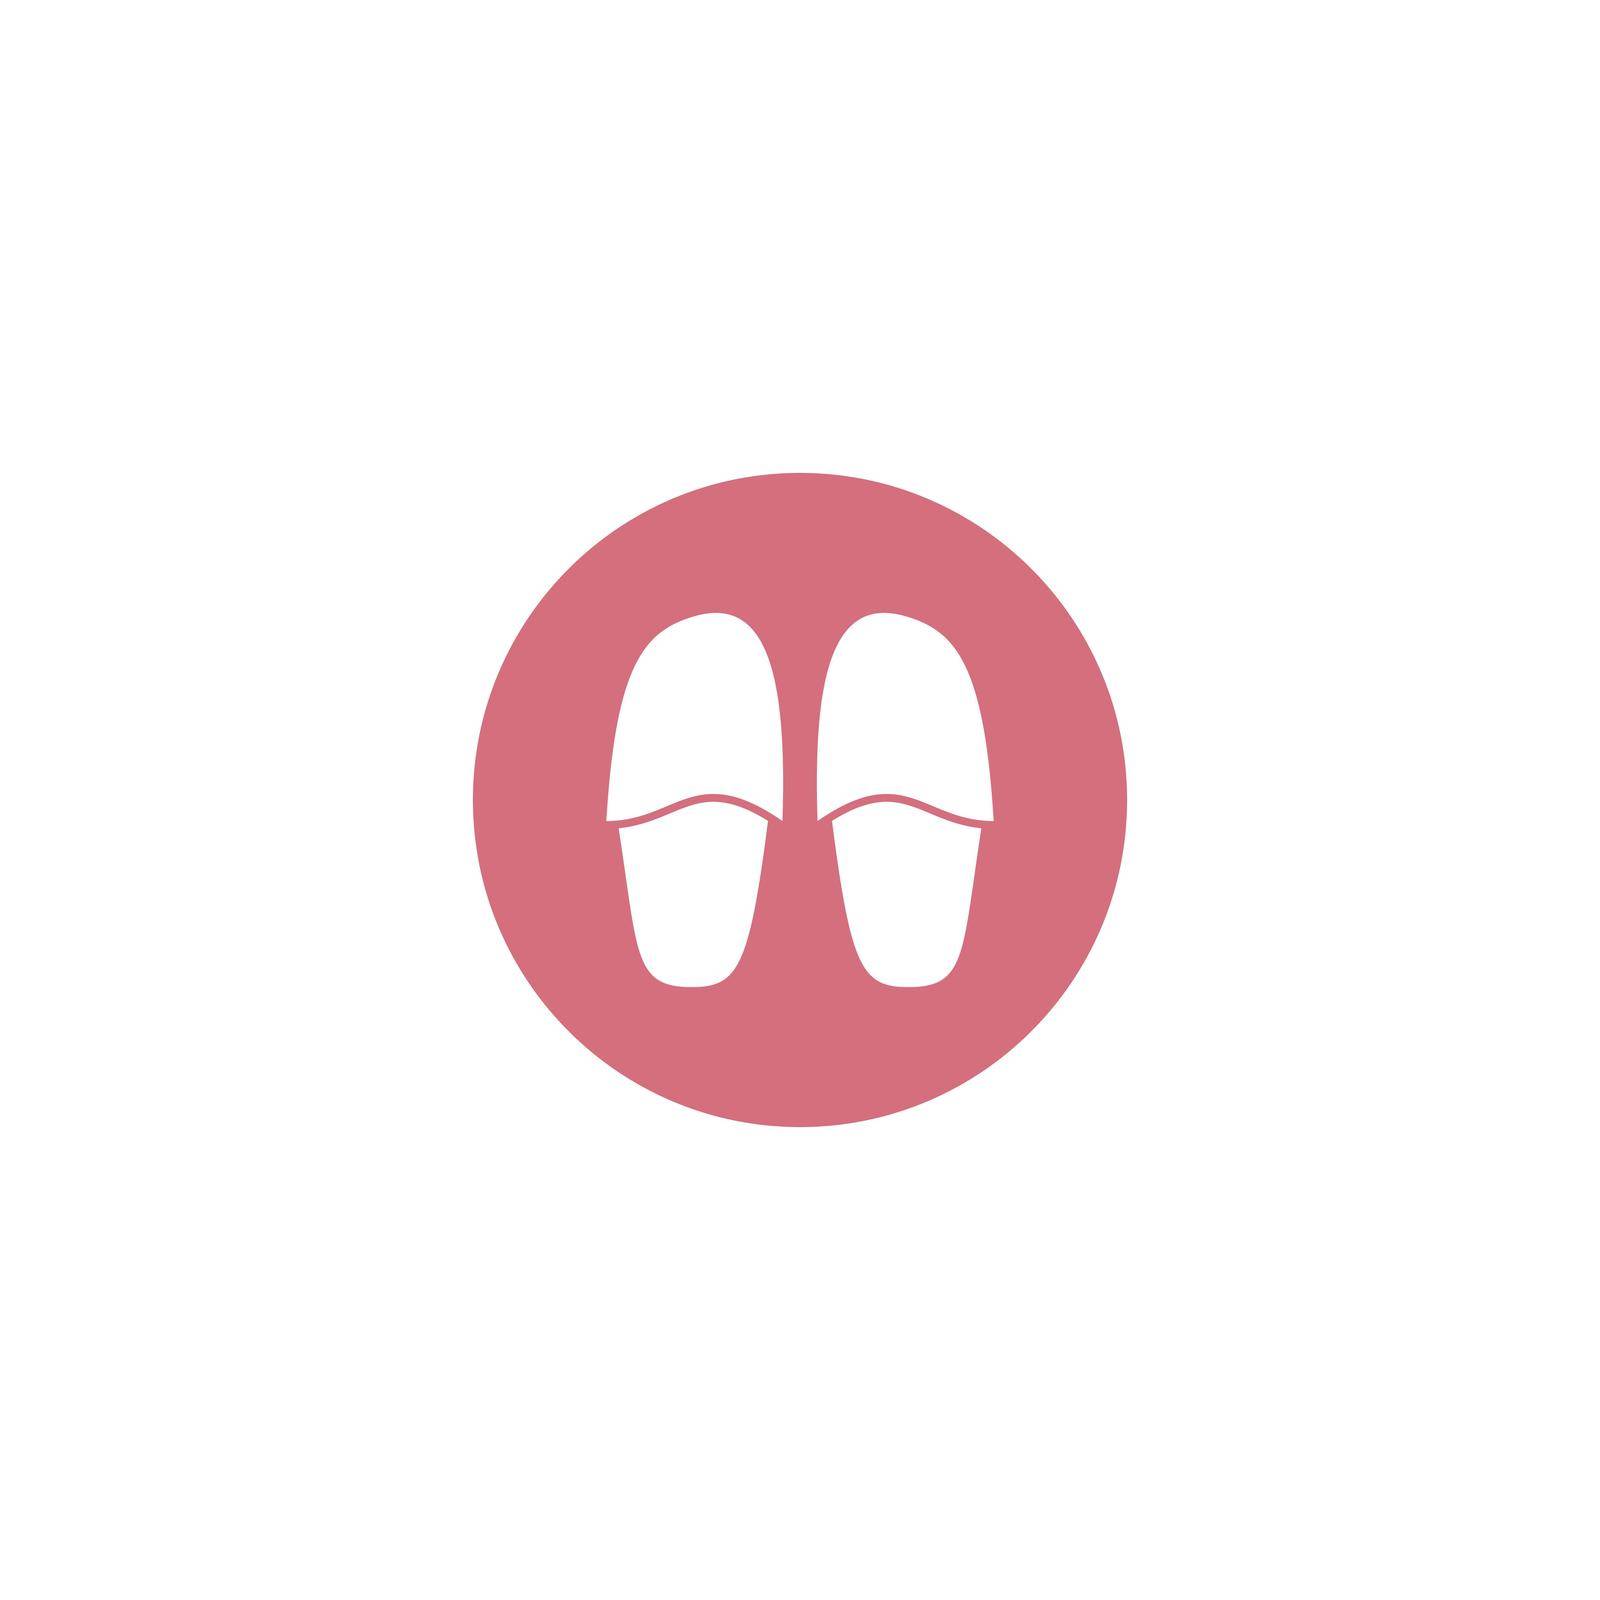 Slippers icon by rnking